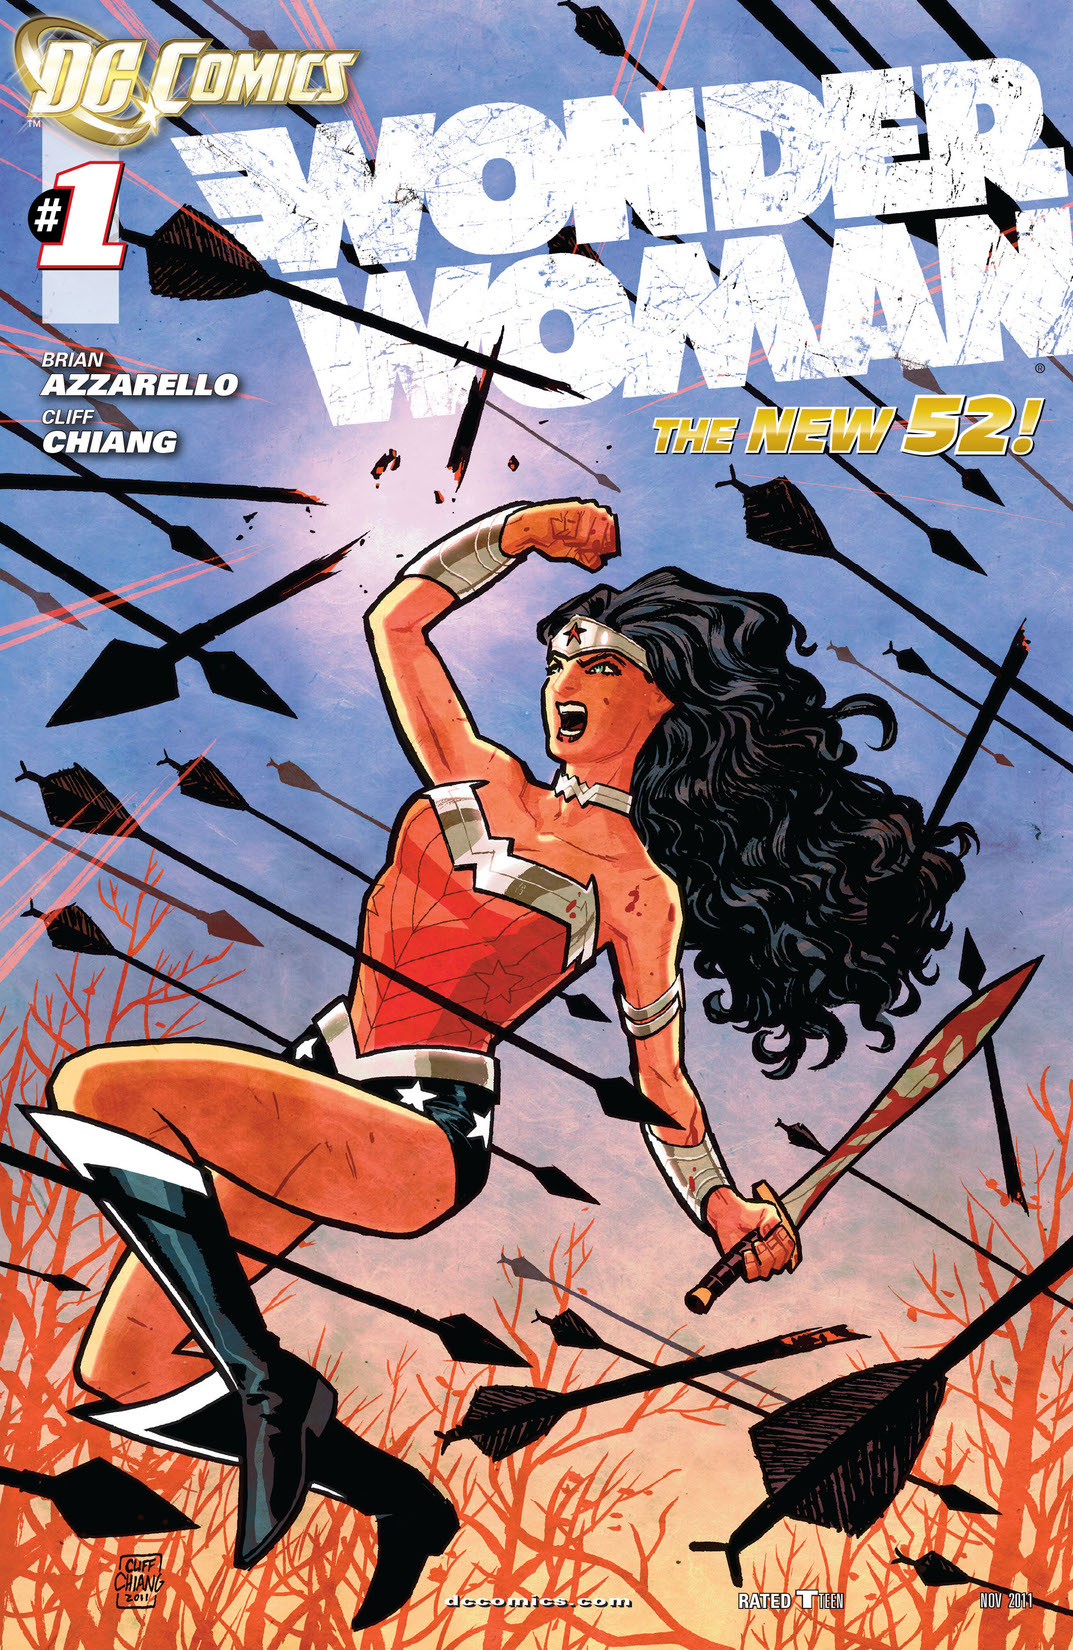 Wonder Woman (2011-) #1 preview images